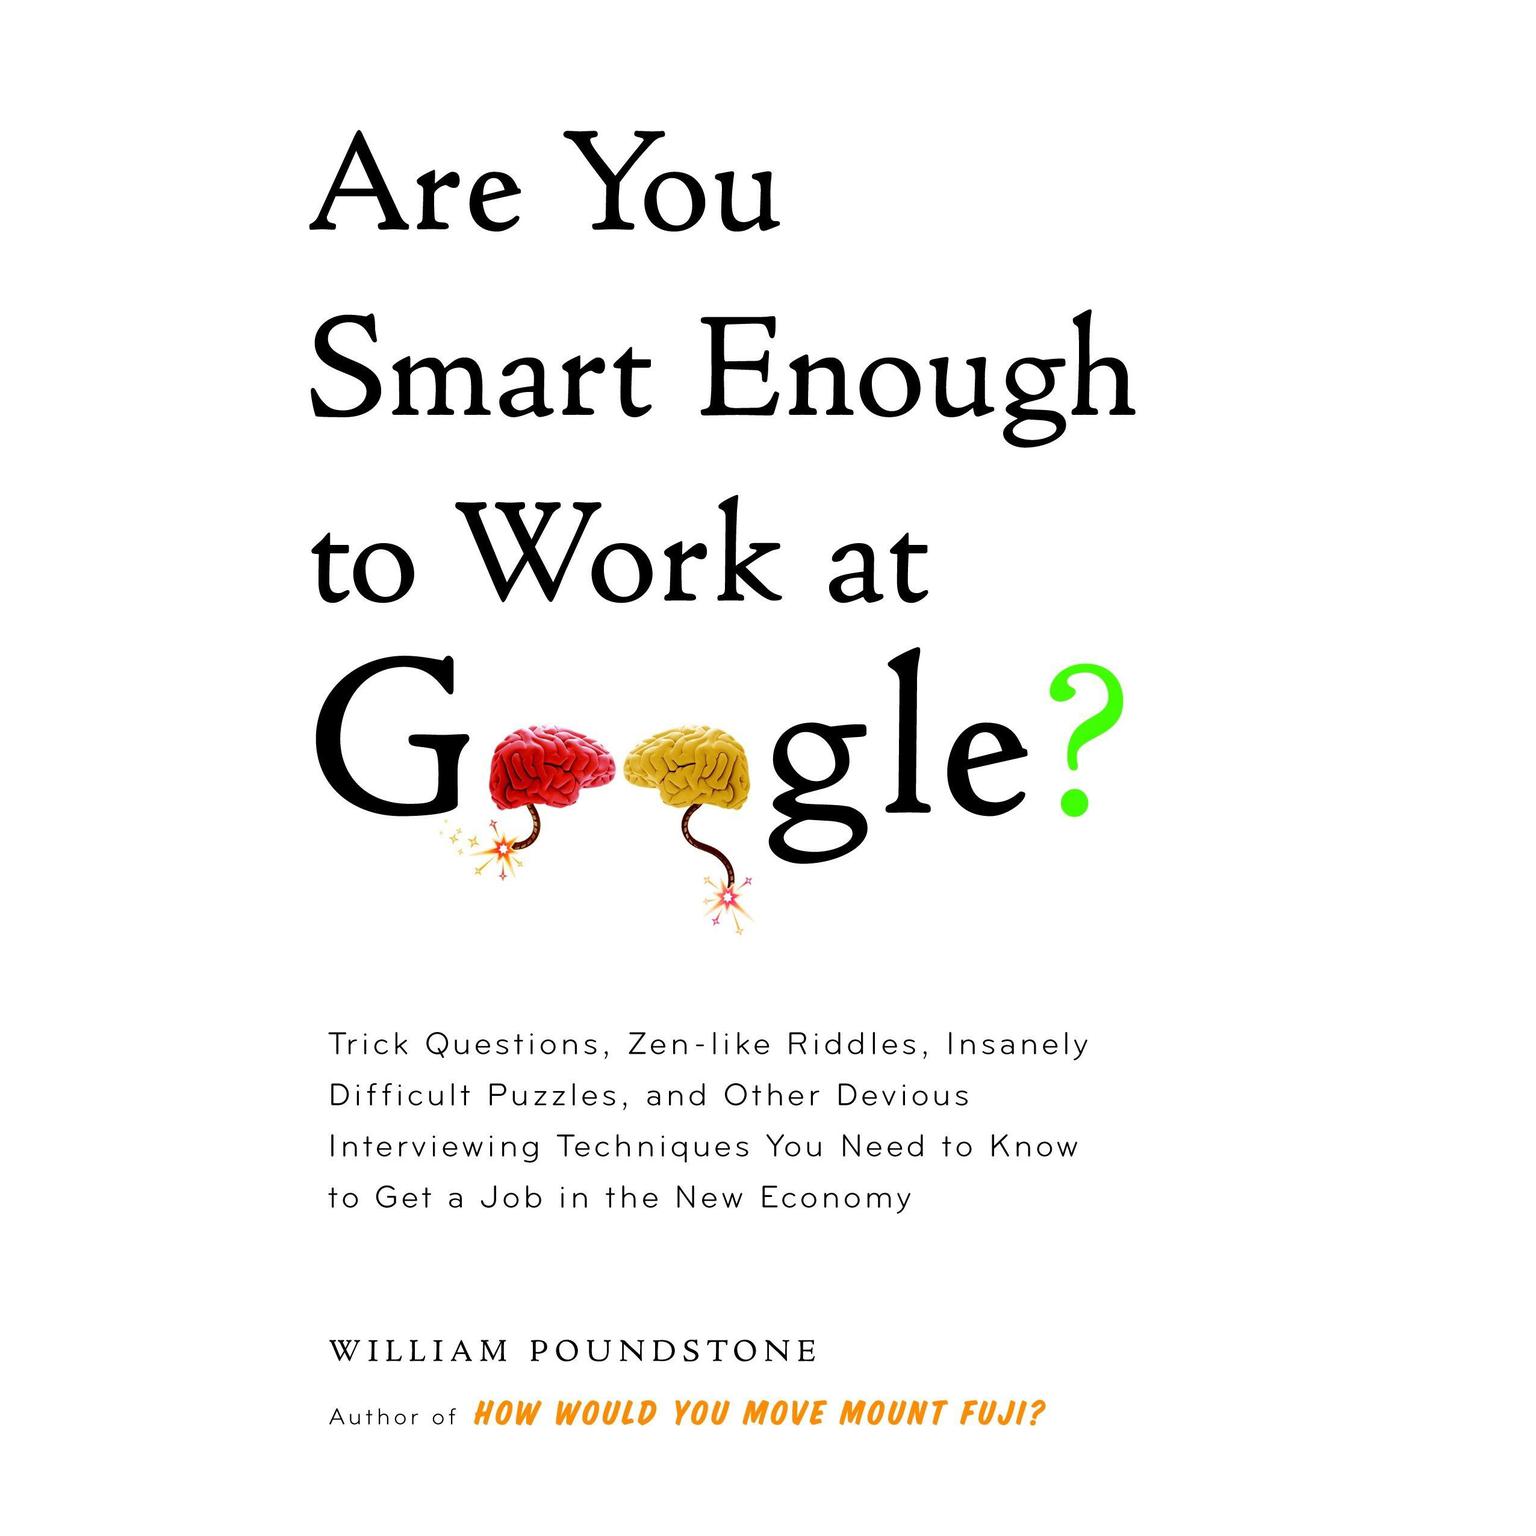 Are You Smart Enough to Work at Google?: Trick Questions, Zen-like Riddles, Insanely Difficult Puzzles, and Other Devious Interviewing Techniques You Need to Know to Get a Job in the New Economy Audiobook, by William Poundstone